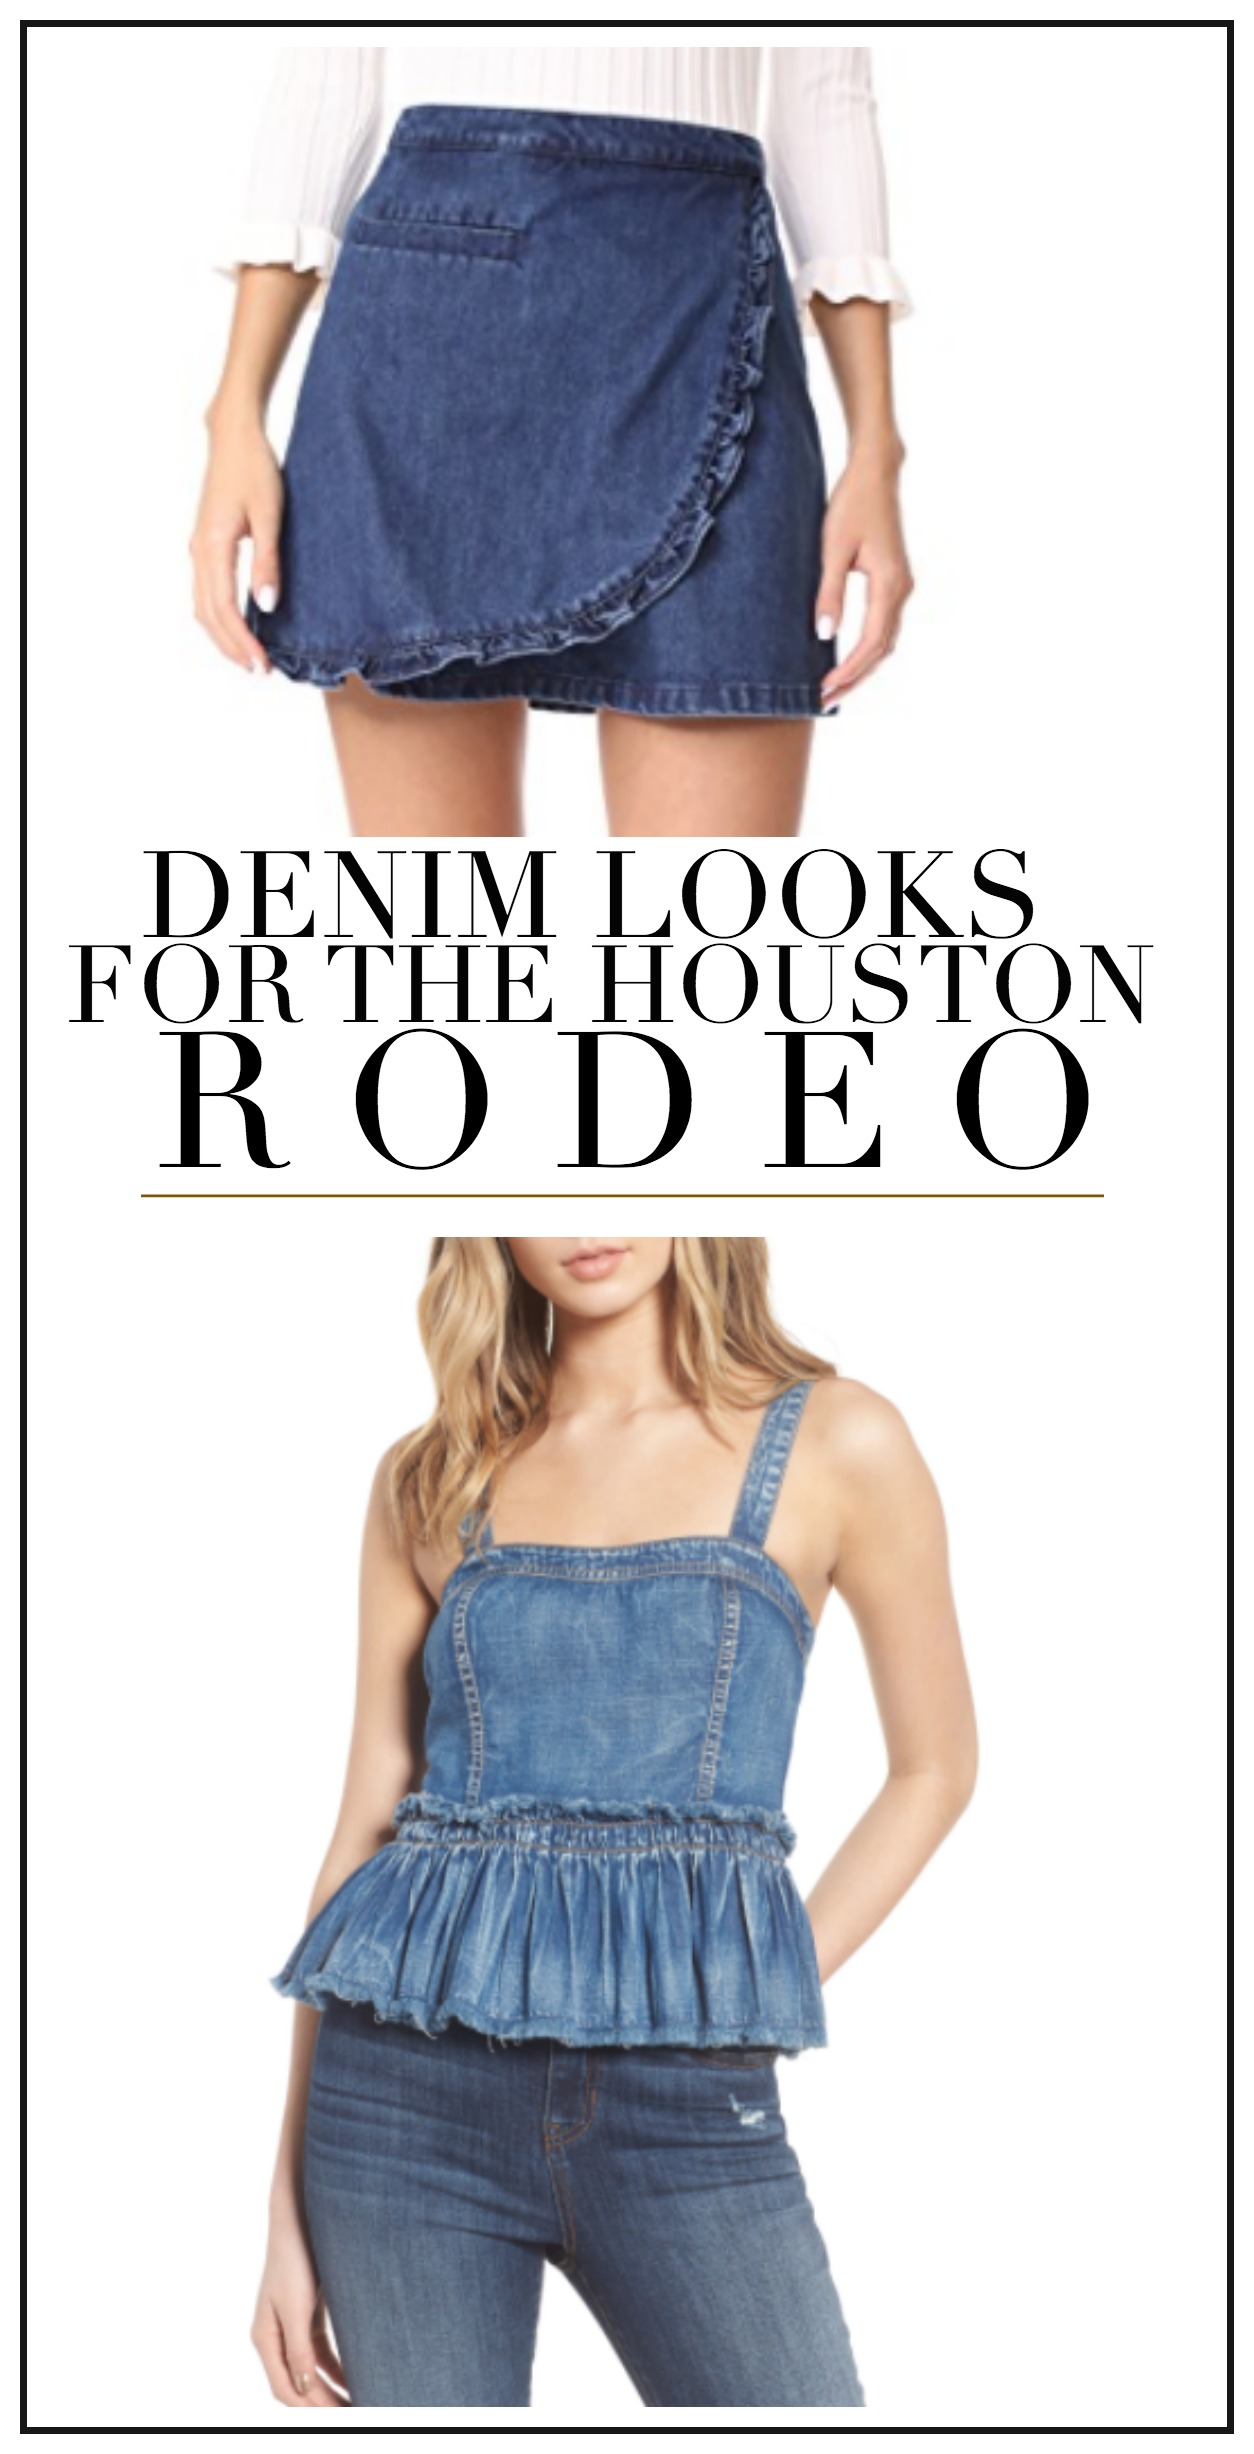 rodeo, denim wear, denim outfits, what to wear to the rodeo, rodeo outfit inspiration, summer denim outfits, spring denim outfits